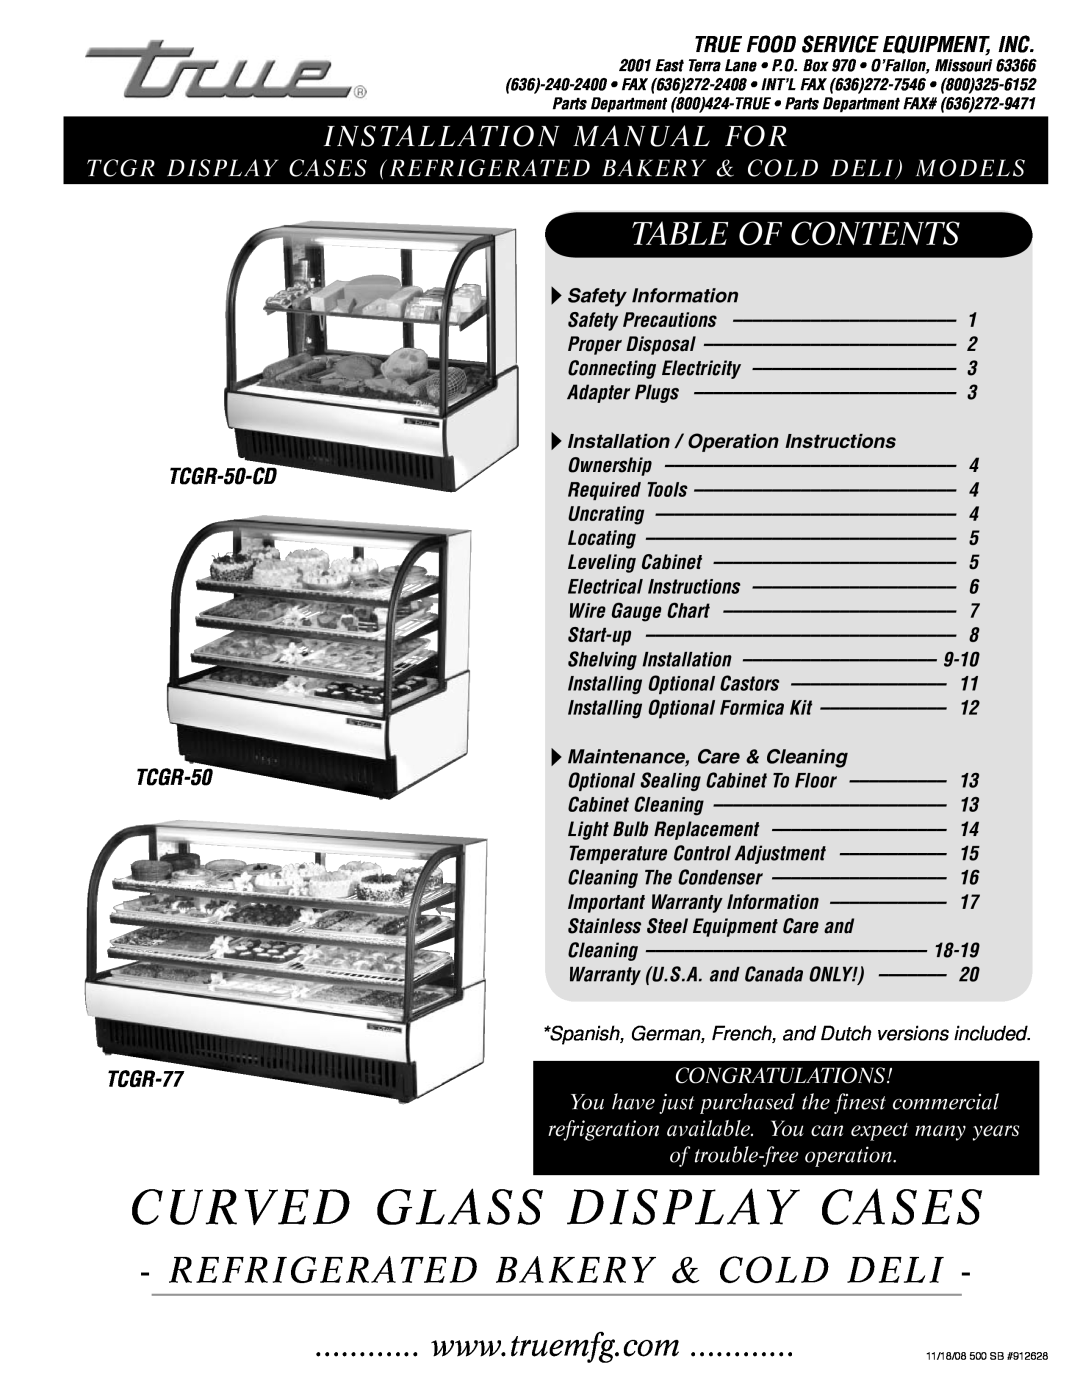 True Manufacturing Company TCGR-50 installation manual Curved Glass Display Cases, Refrigerated Bakery & Cold Deli 